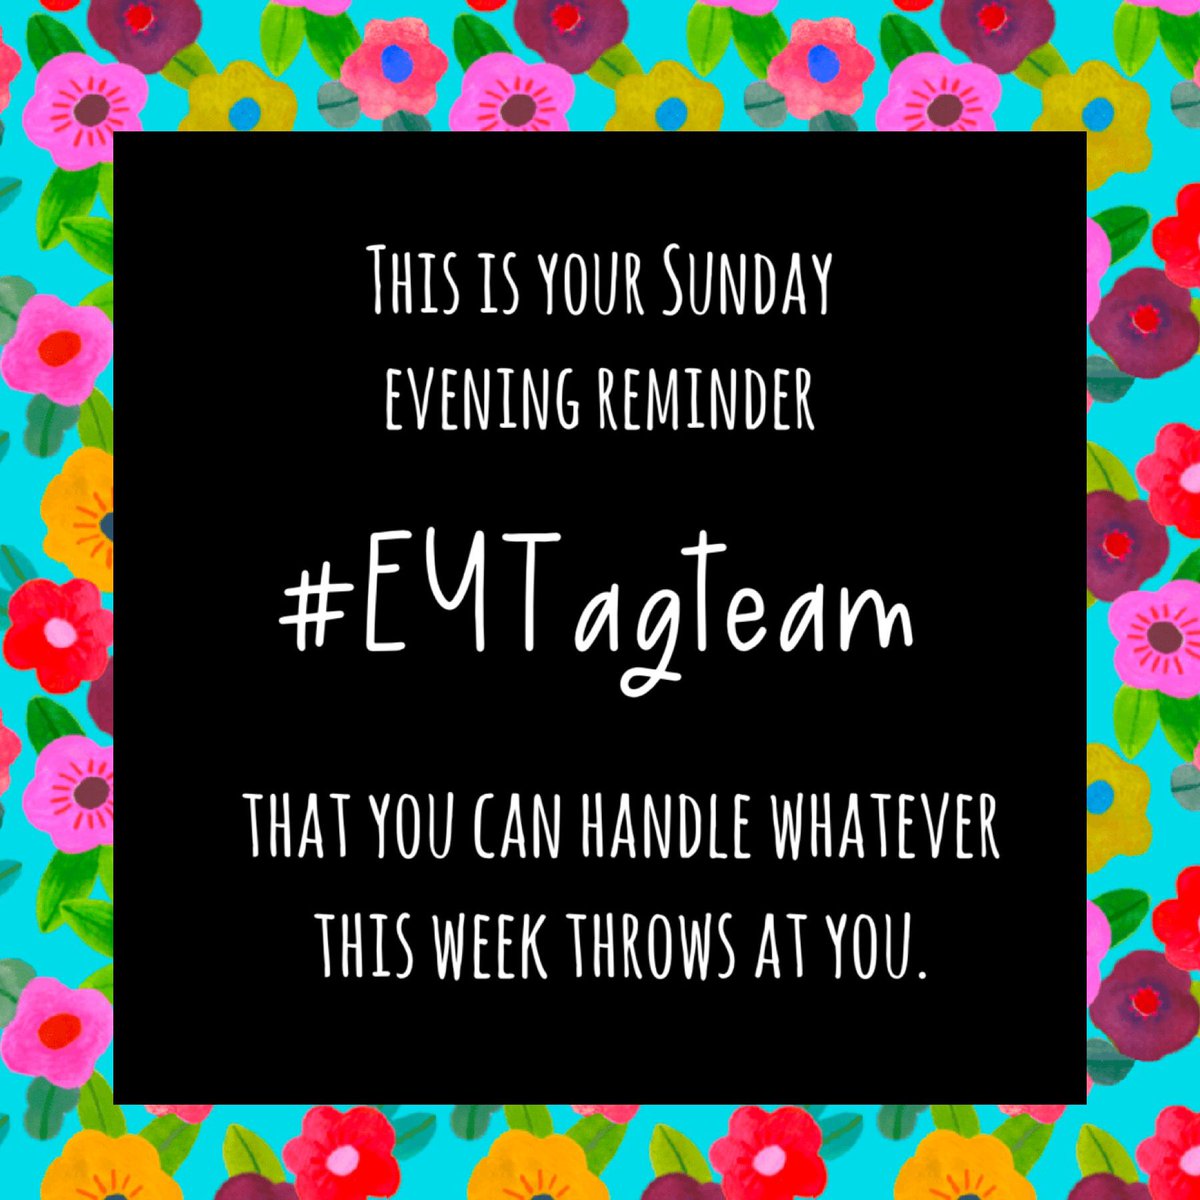 This is your Sunday evening reminder #EYTageam that you can handle whatever this coming week throws at you; we are only ever a DM or tweet away. 

Remember we are always #StrongerTogether. Stay safe and we wish you all a good week ahead.

 #EYtwittertagteam